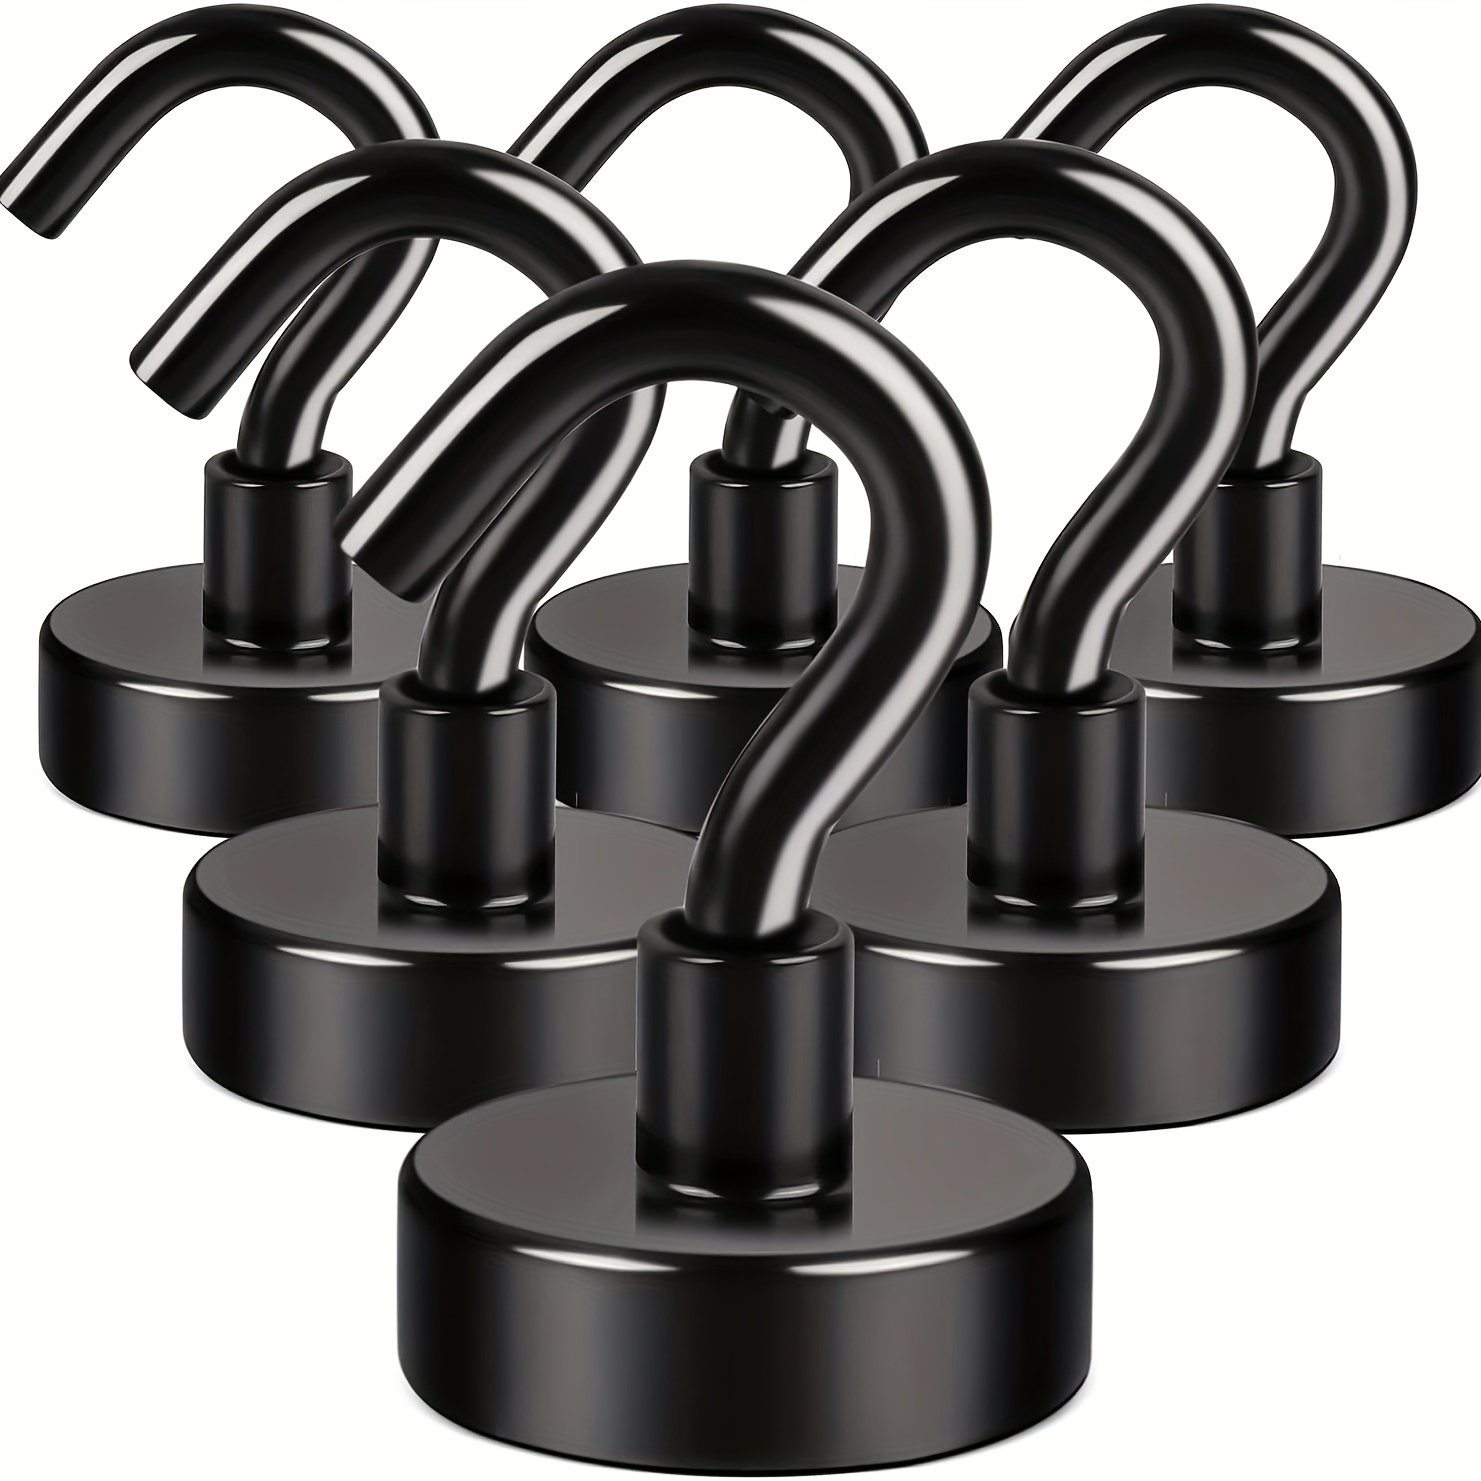 

6pcs Black Magnetic Hook 25 Lbs (approx. 11.3 Kg) For Cruising, Barbecues, Towels, Indoor Hangings, Kitchens, Workplaces, Mikede Offices, And Garages